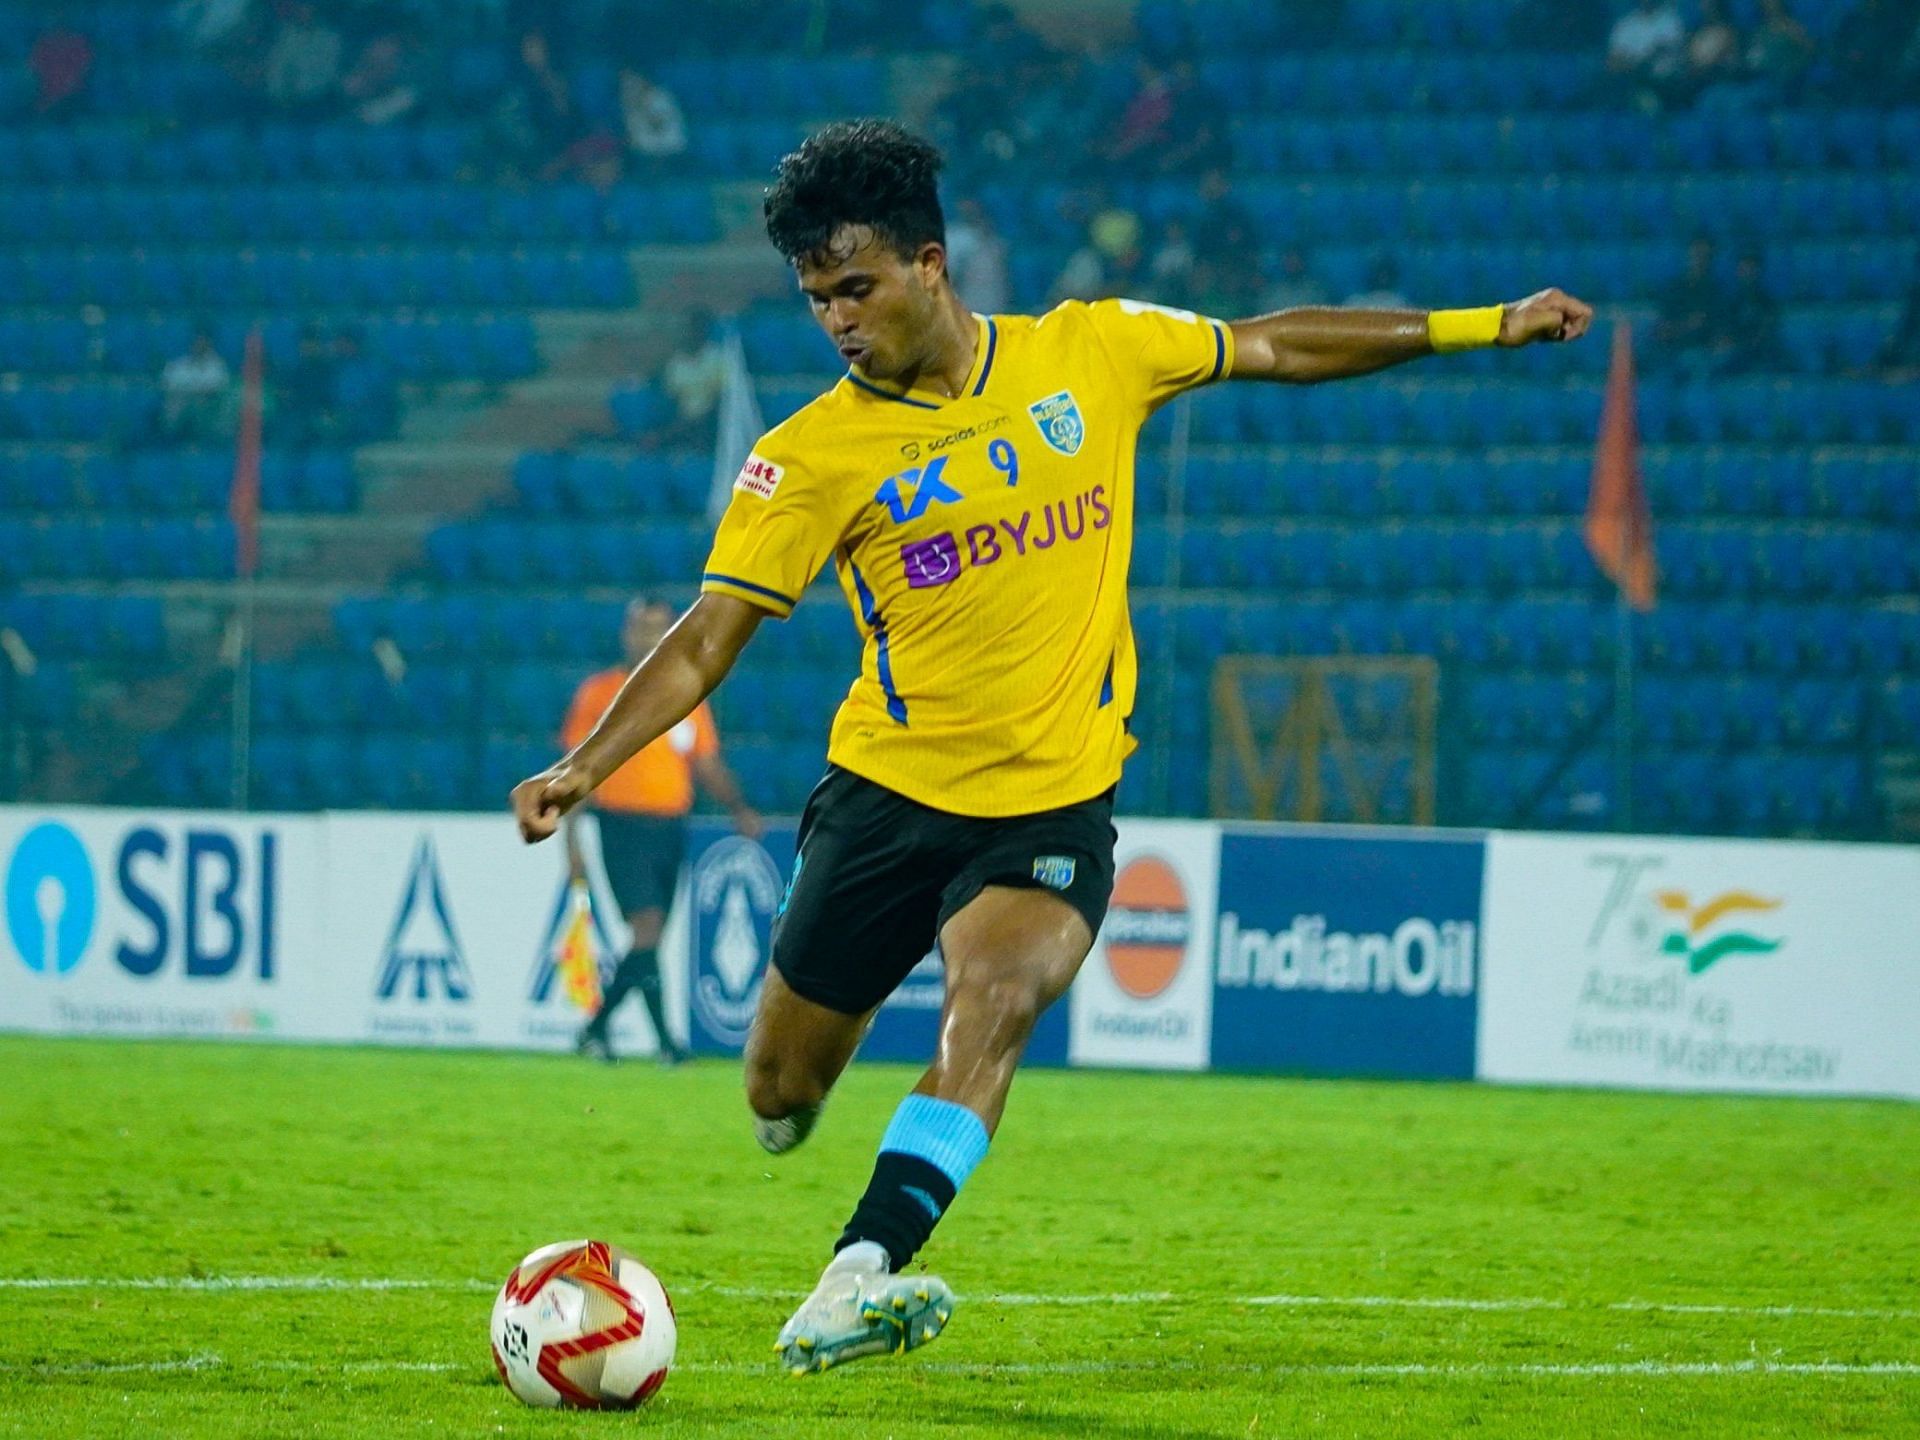 19-year-old Muhammed Ajsal has scored two goals for Kerala Blasters FC in the 2022 Durand Cup so far. (Image - Twitter @KeralaBlasters)